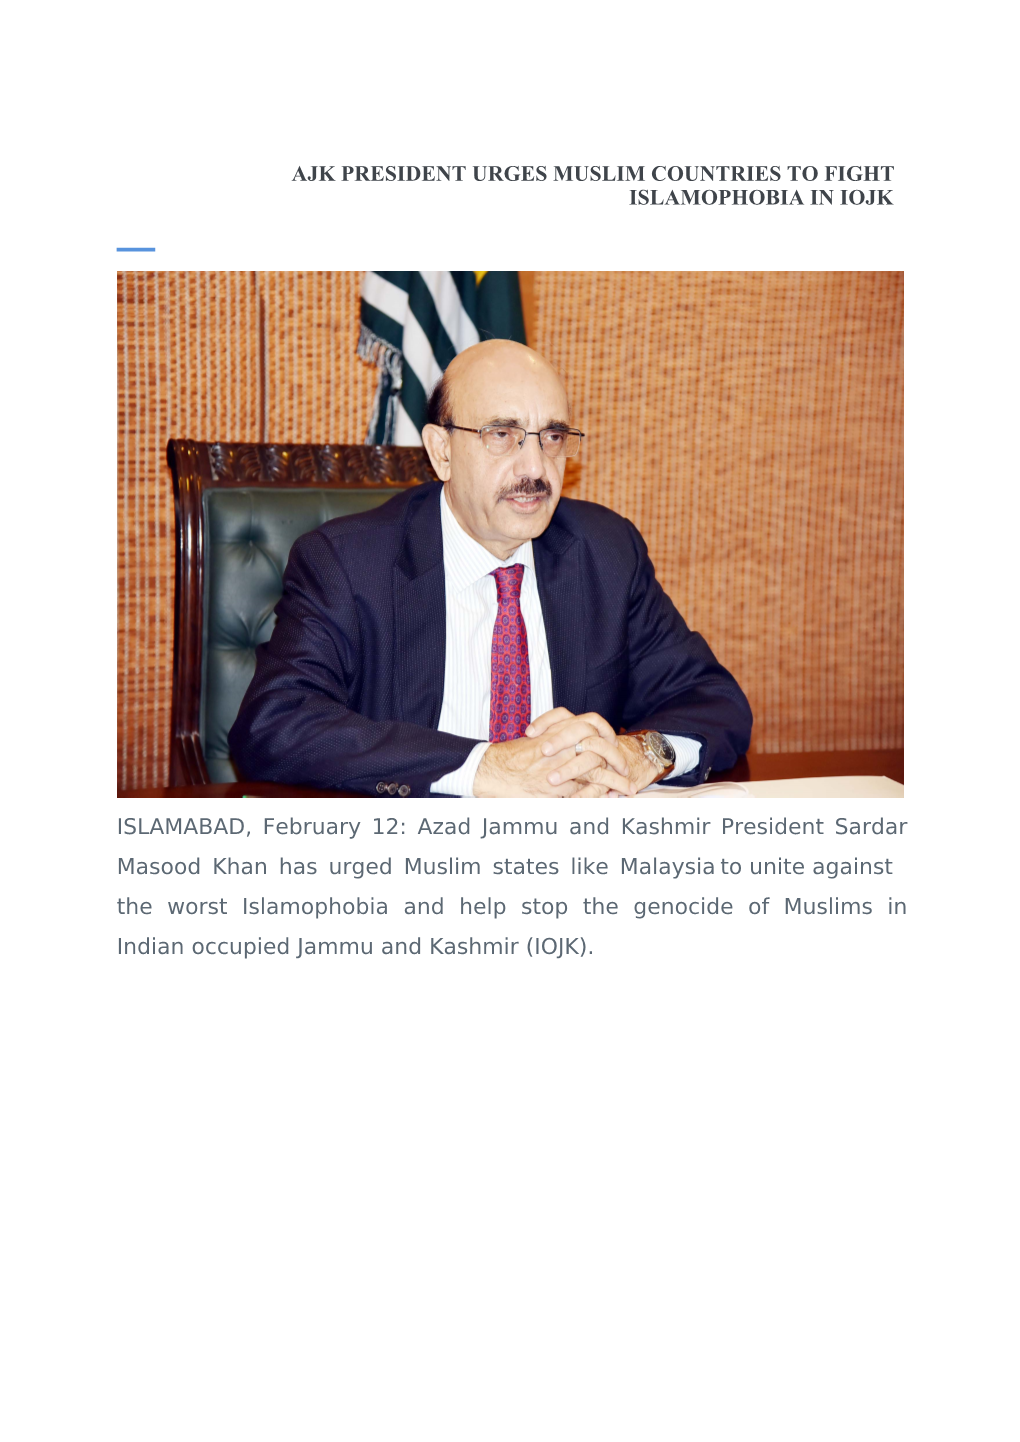 Ajk President Urges Muslim Countries to Fight Islamophobia in Iojk